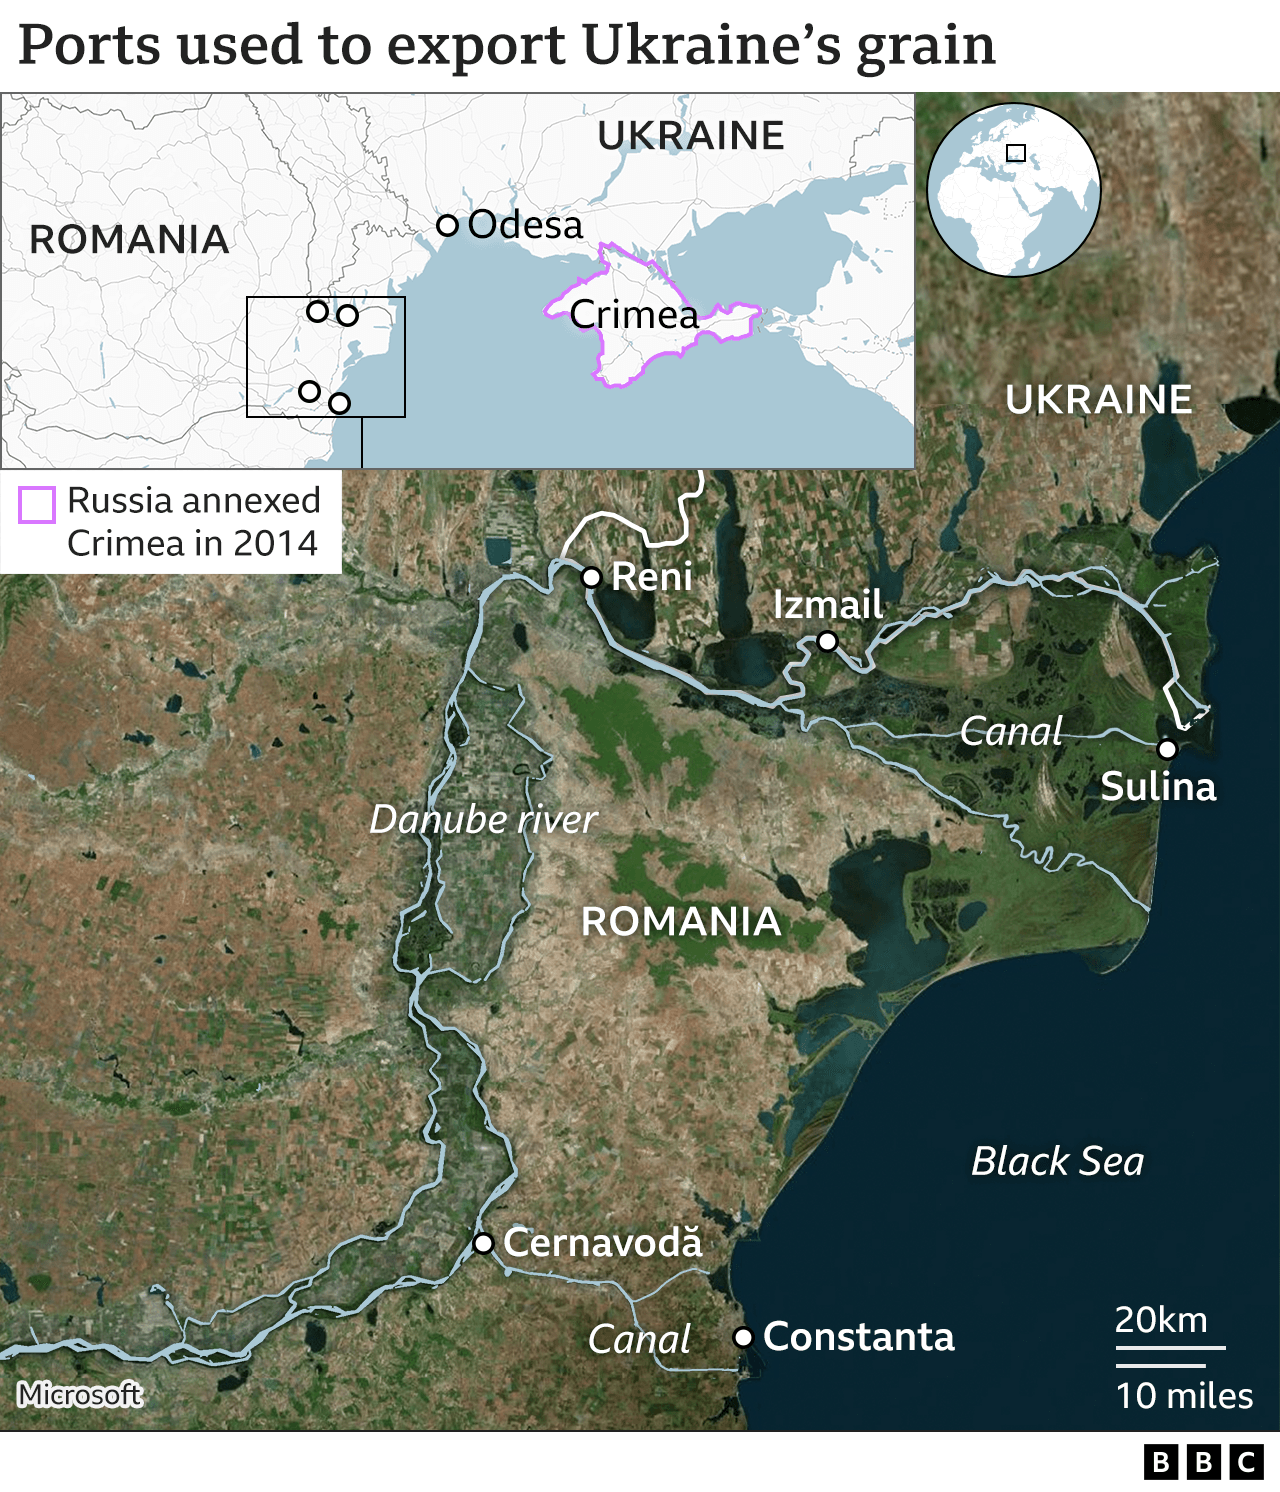 Map showing ports used to export Ukraine's grain